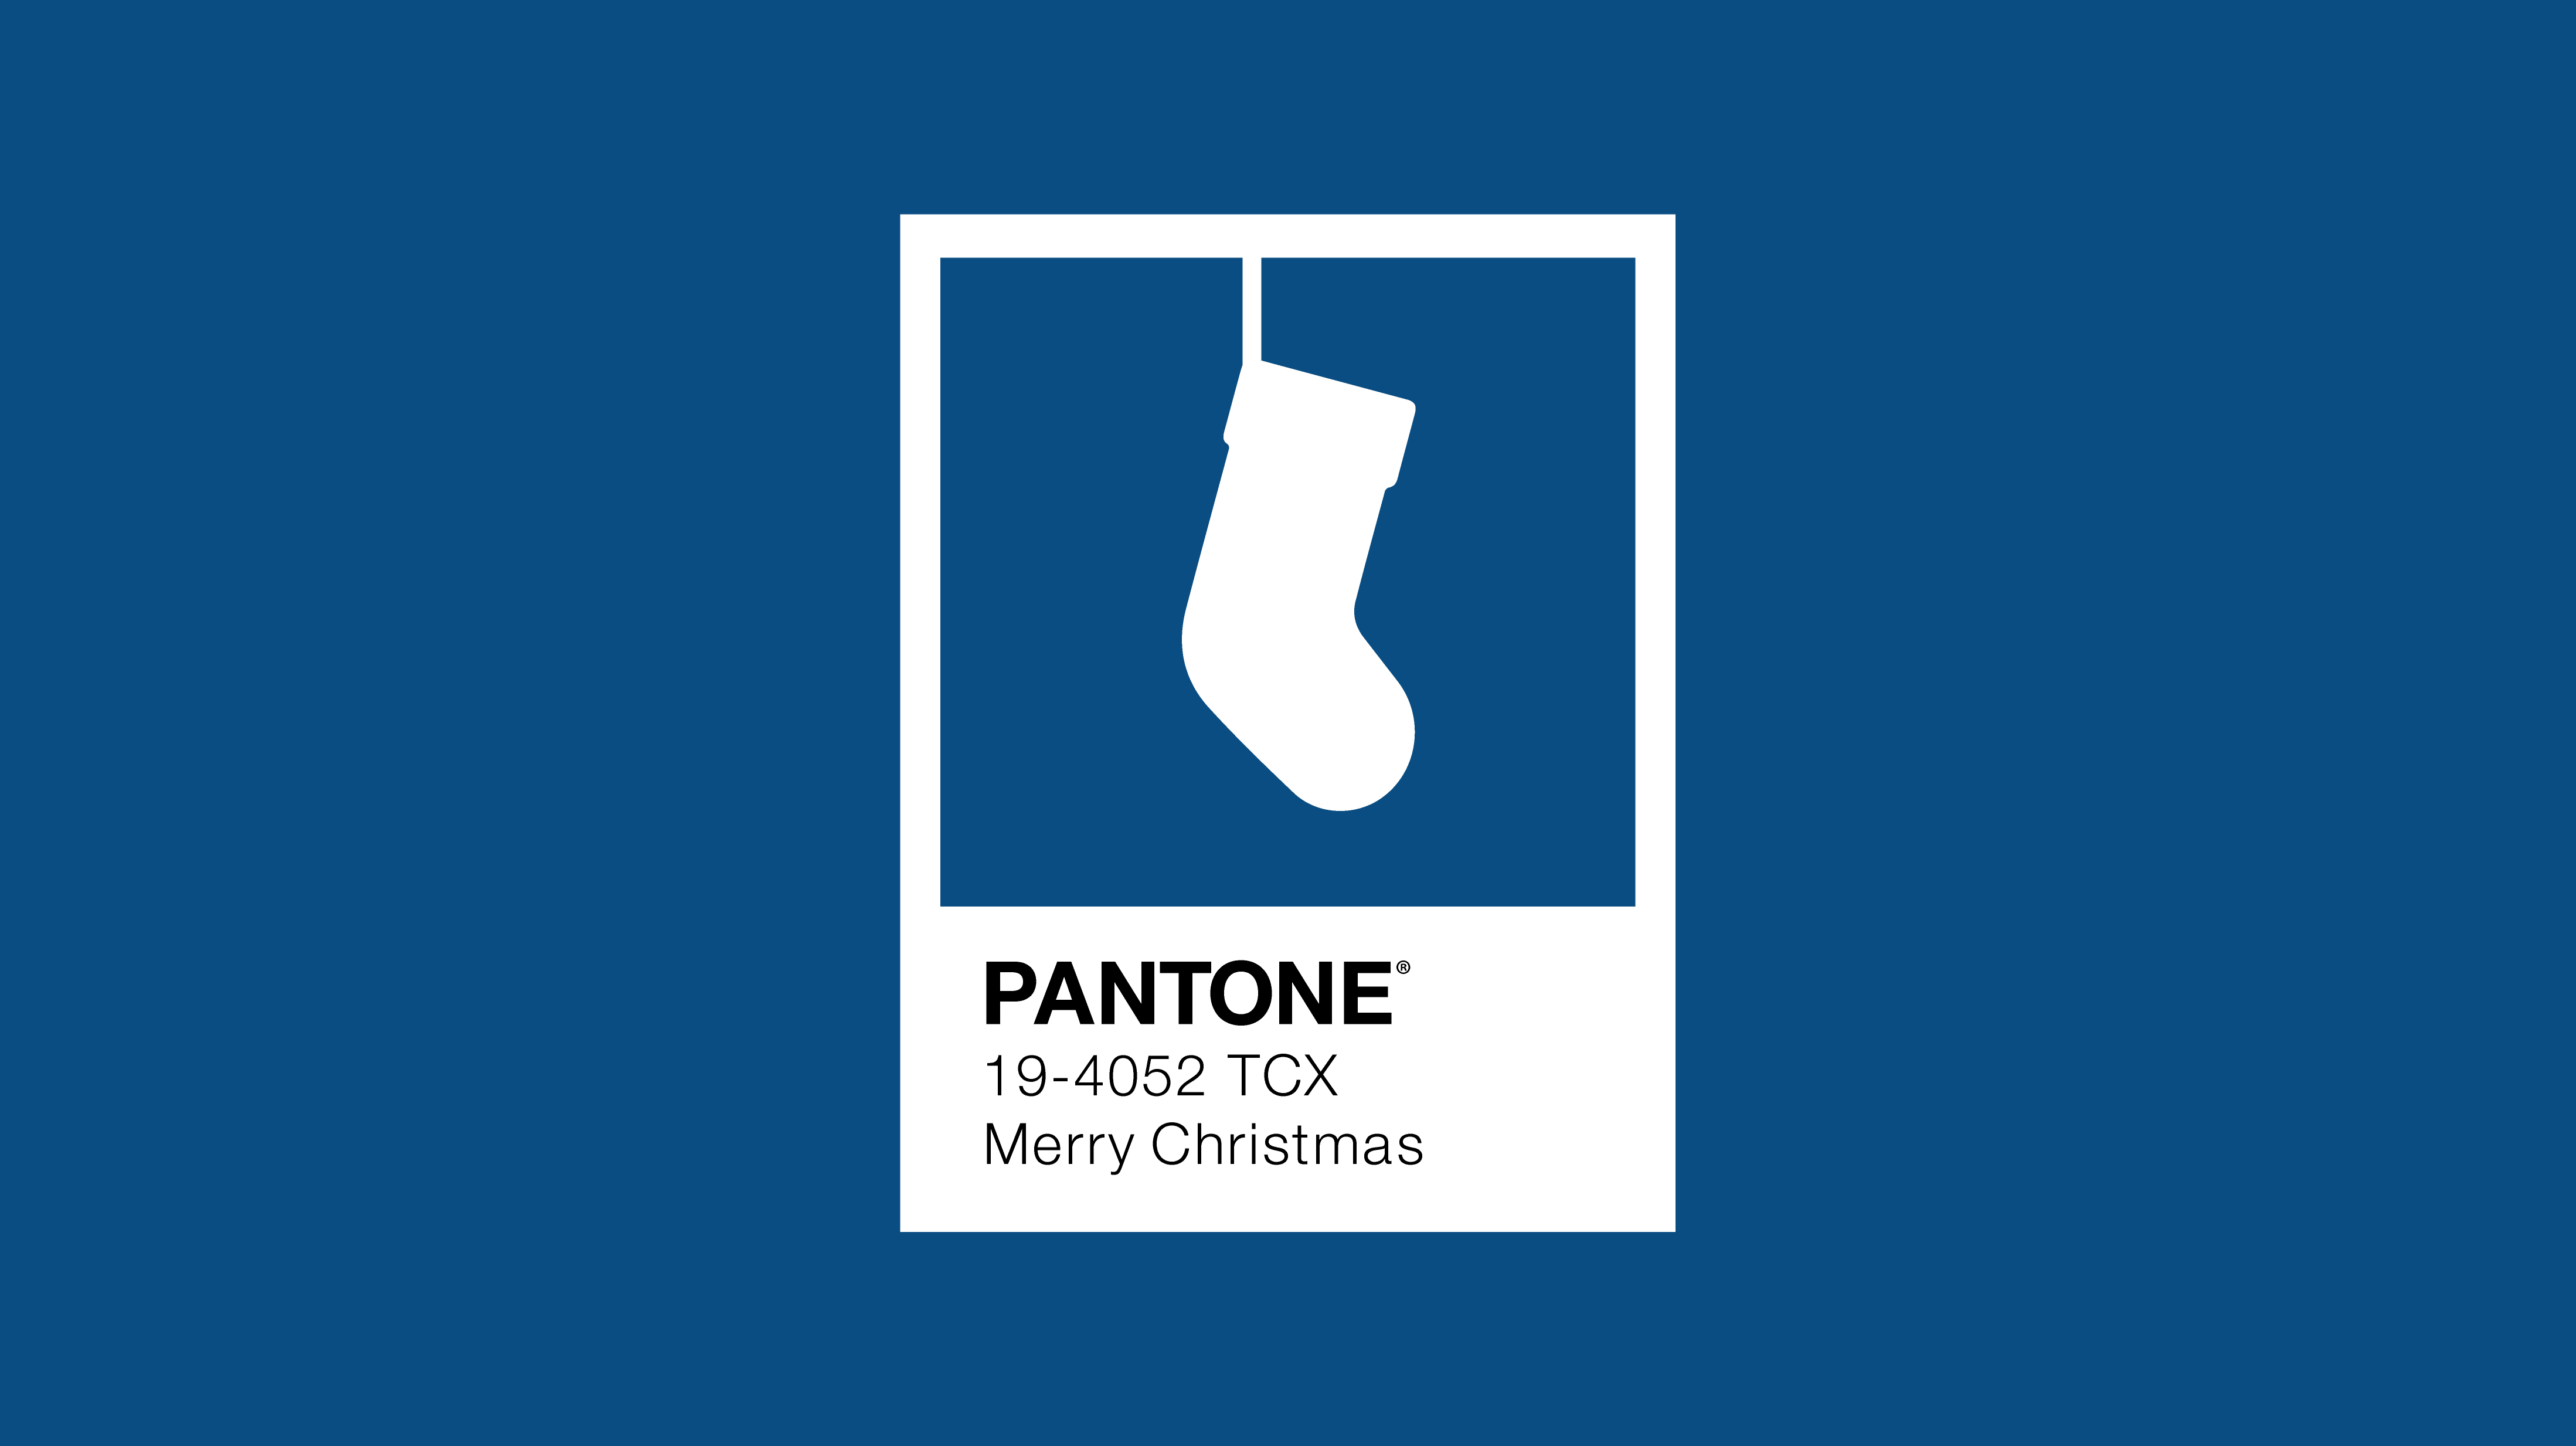 Pantone colour of the year 2020 design with Christmas stocking